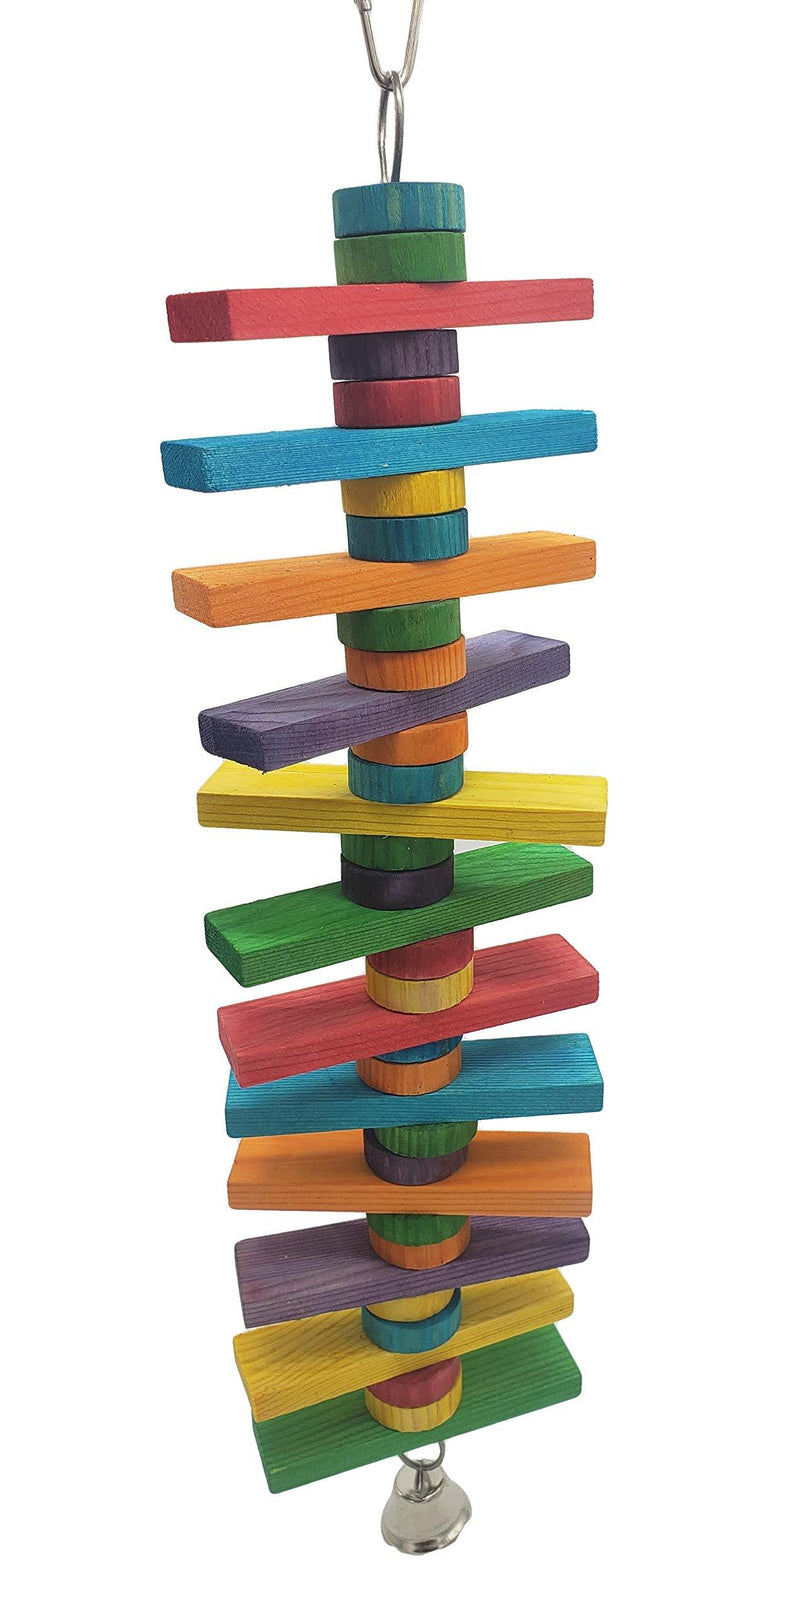 [Australia] - Tropical Chickens Wooden Bird Chew Toy, 14 Inches Colorful Hanging Wood Chew Blocks, Natural Wood Blocks with Bird Safe Bell, Great for Parrots, Macaws, African Greys and Conures 